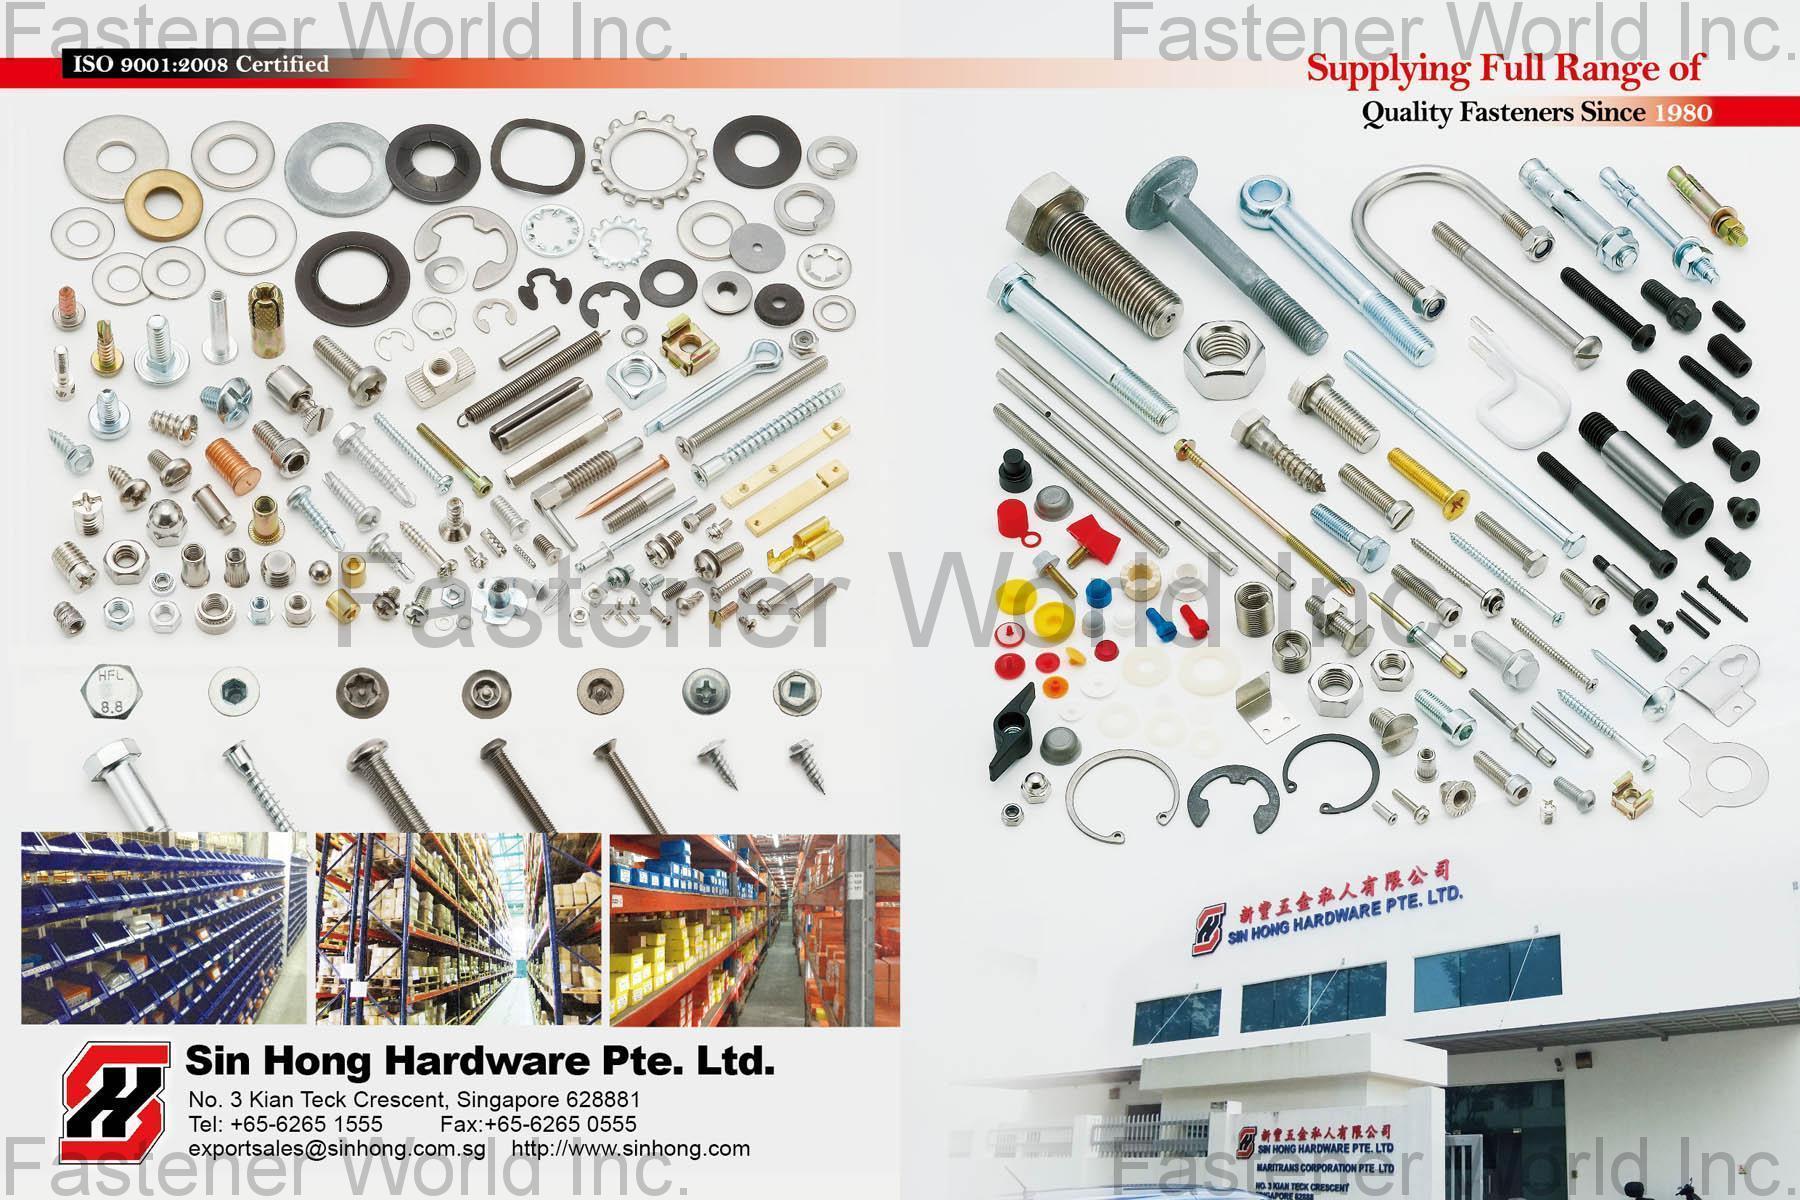 SIN HONG HARDWARE PTE. LTD  , BOLTS /  STUD BOLTS / SOCKET SCREW /  MACHINE  SCREW /  TAPPING SCREW /  DRILLING SCREW / NUTS /  WASHER  , All Kinds of Screws